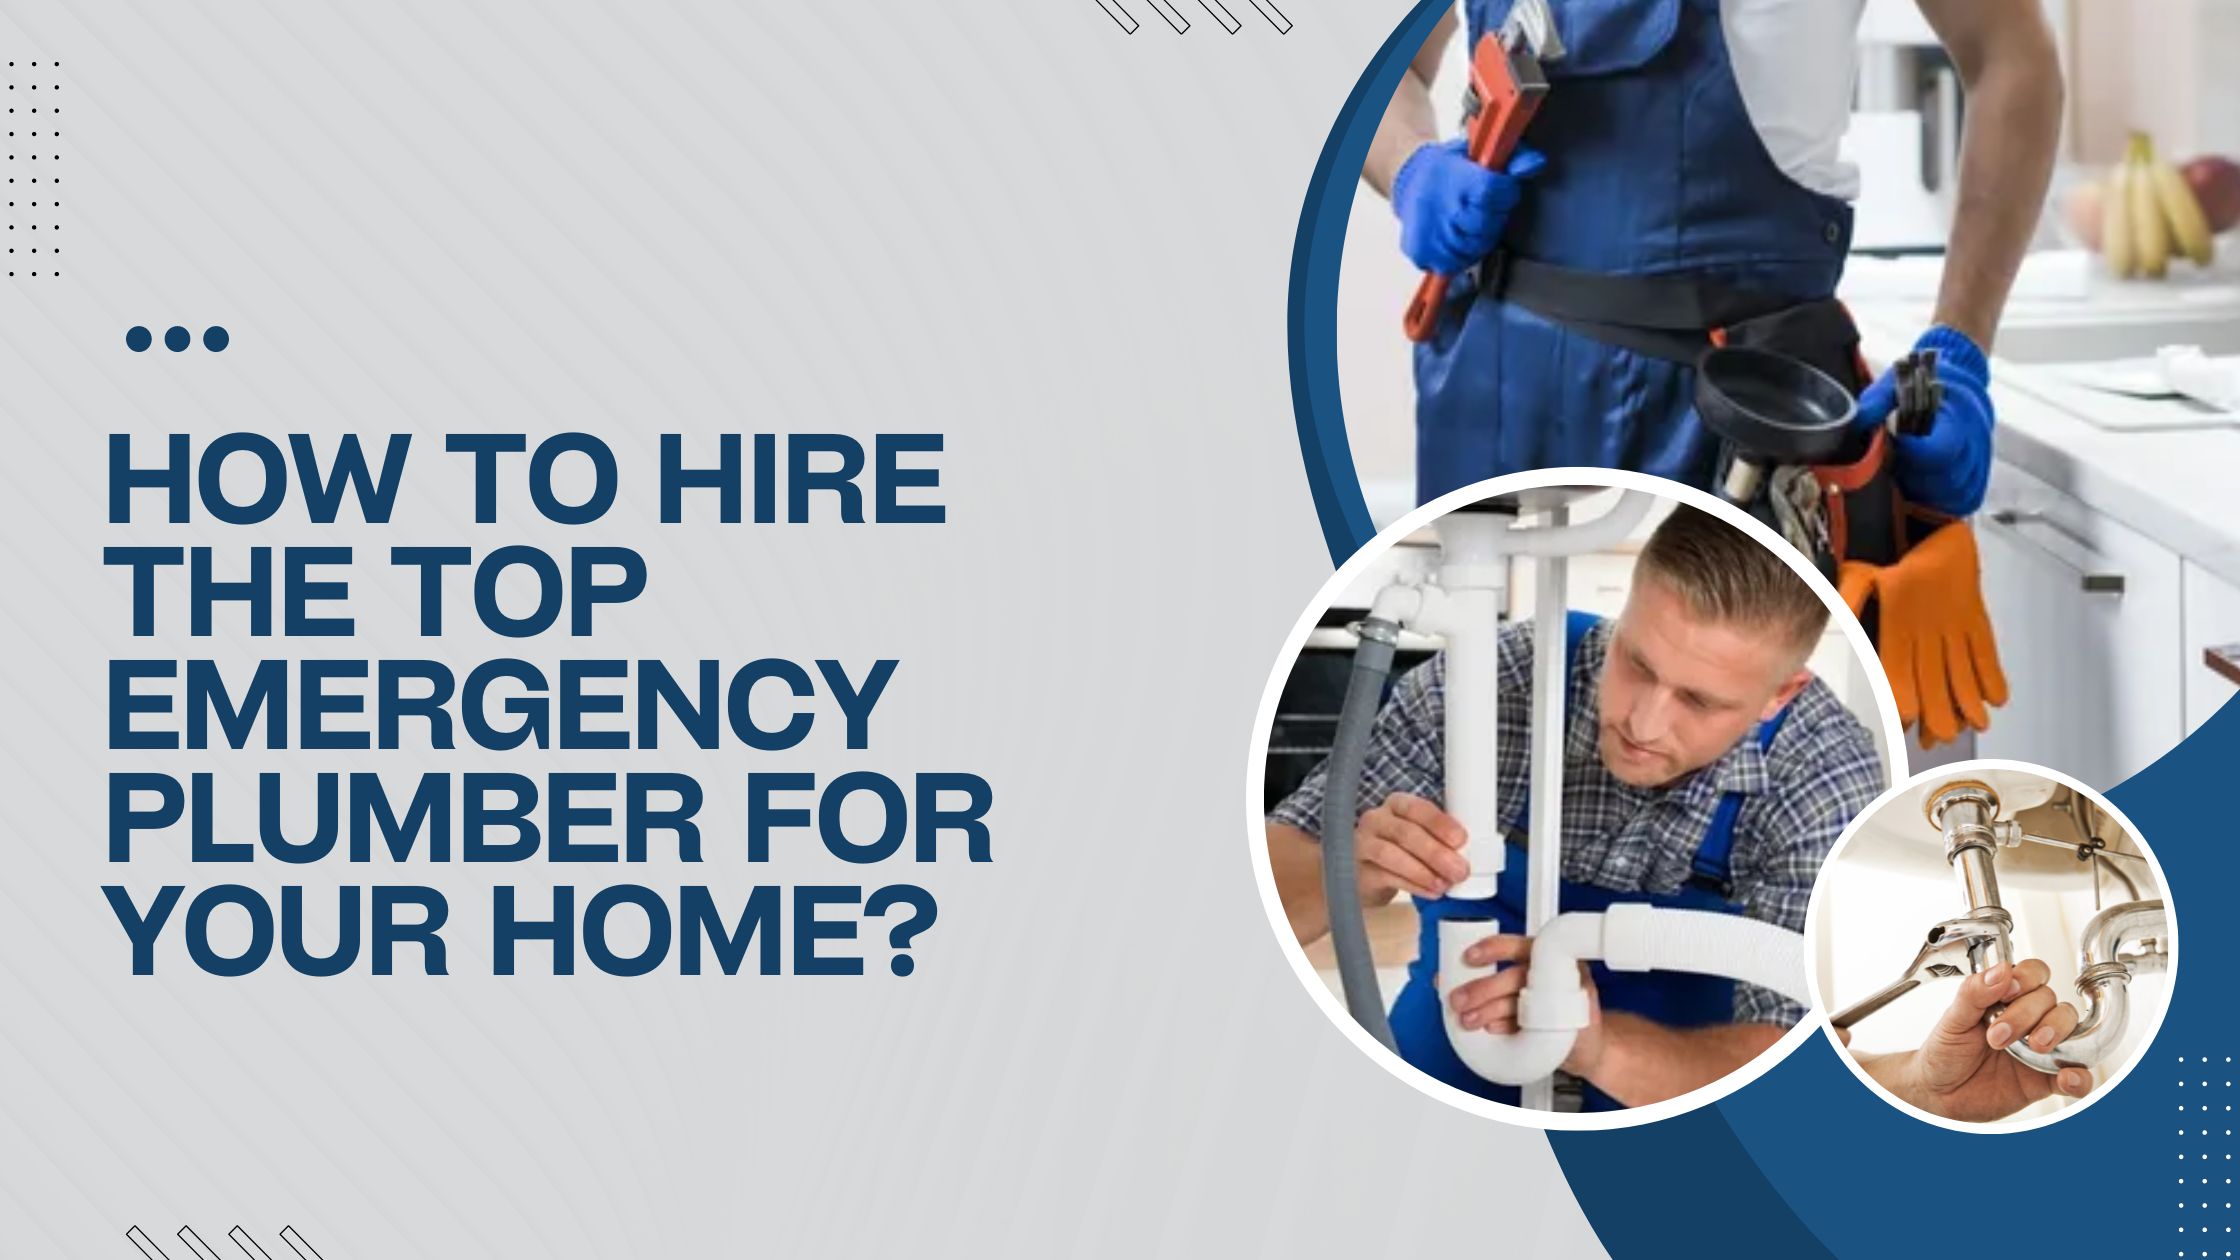 How To Hire The Top Emergency Plumber For Your Home?